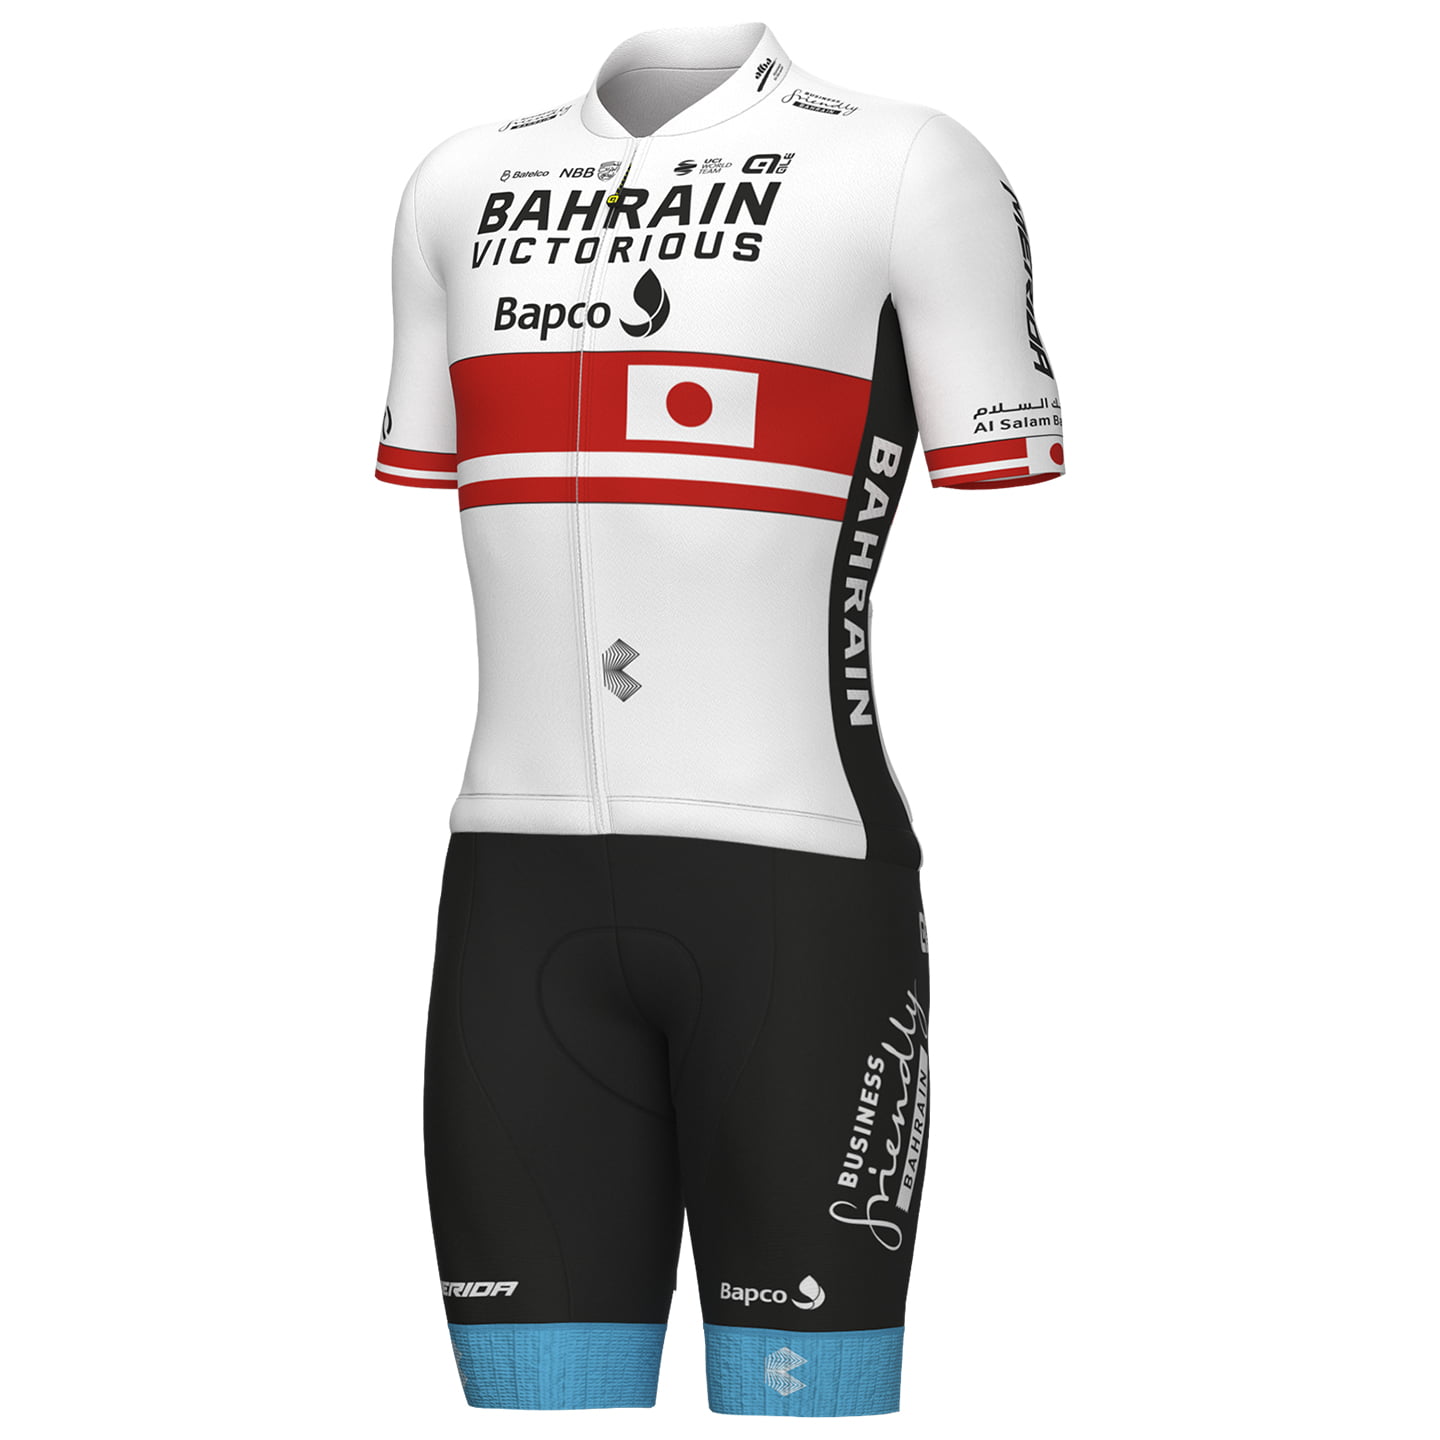 BAHRAIN- VICTORIOUS Japan. Meister 23 Set (cycling jersey + cycling shorts) Set (2 pieces), for men, Cycling clothing